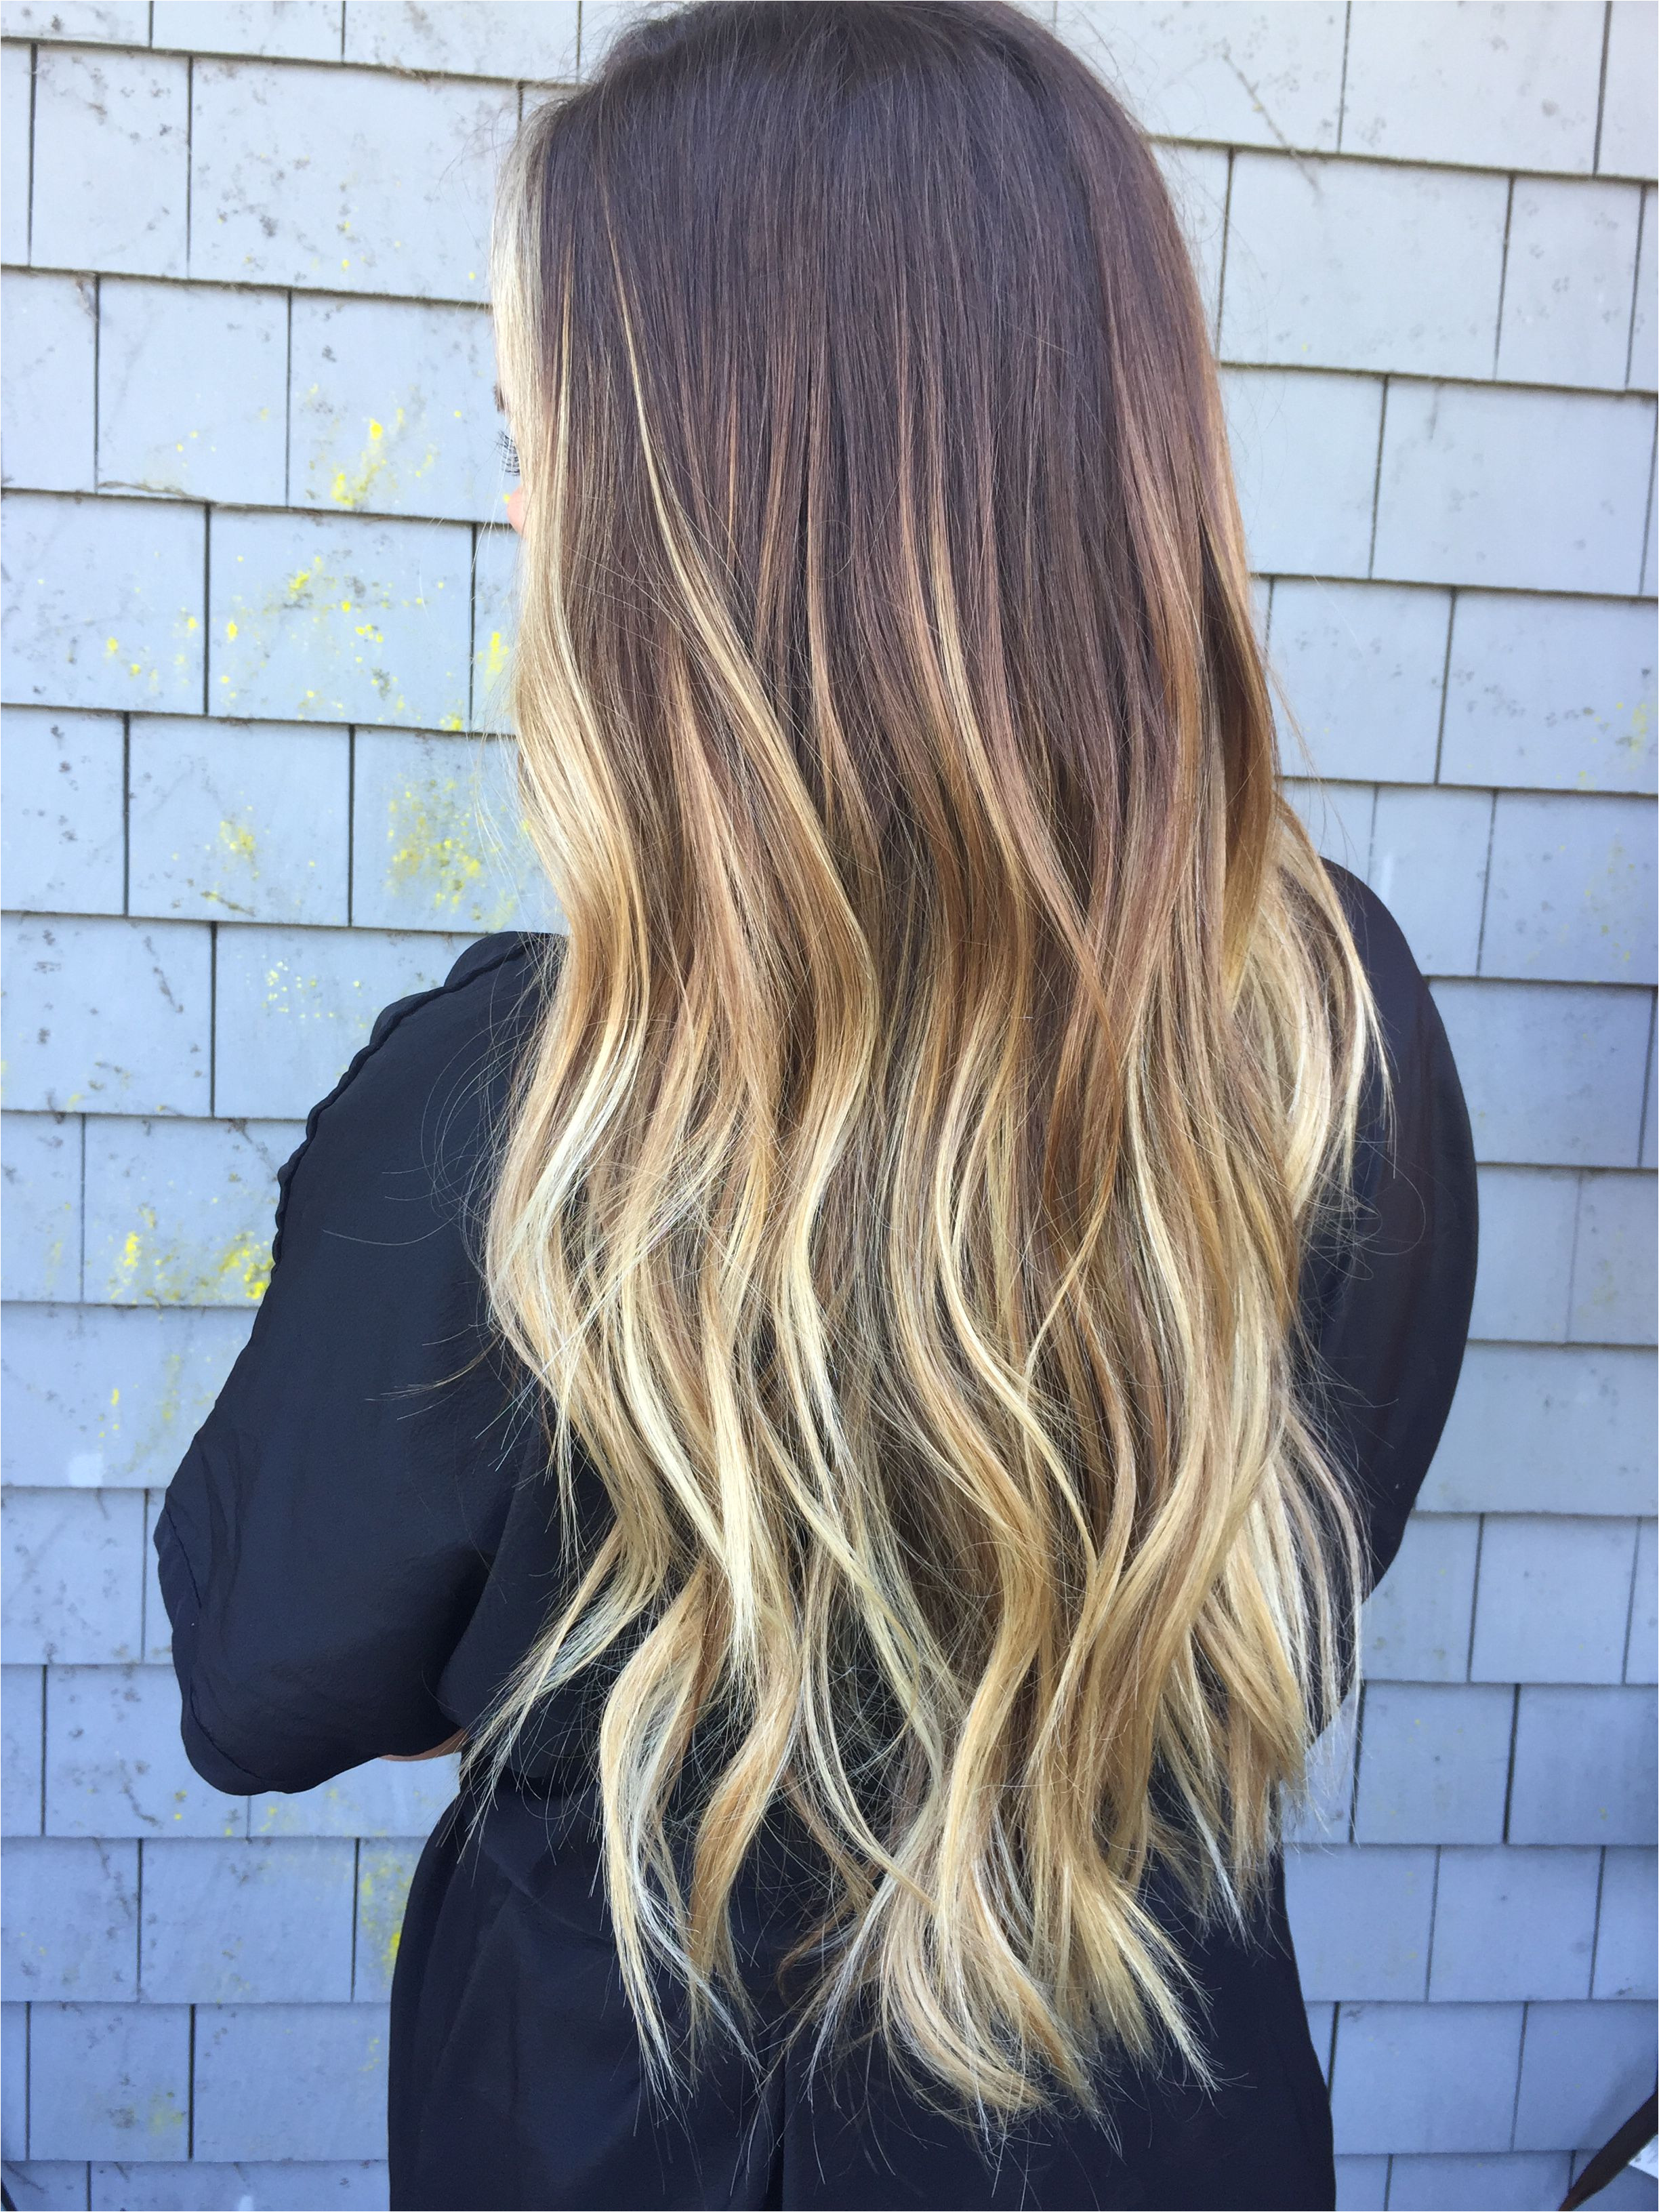 Baliage blonde and brunette ombré fallbre dark roots blonde ends by kristy harris dipietro todd mill valley